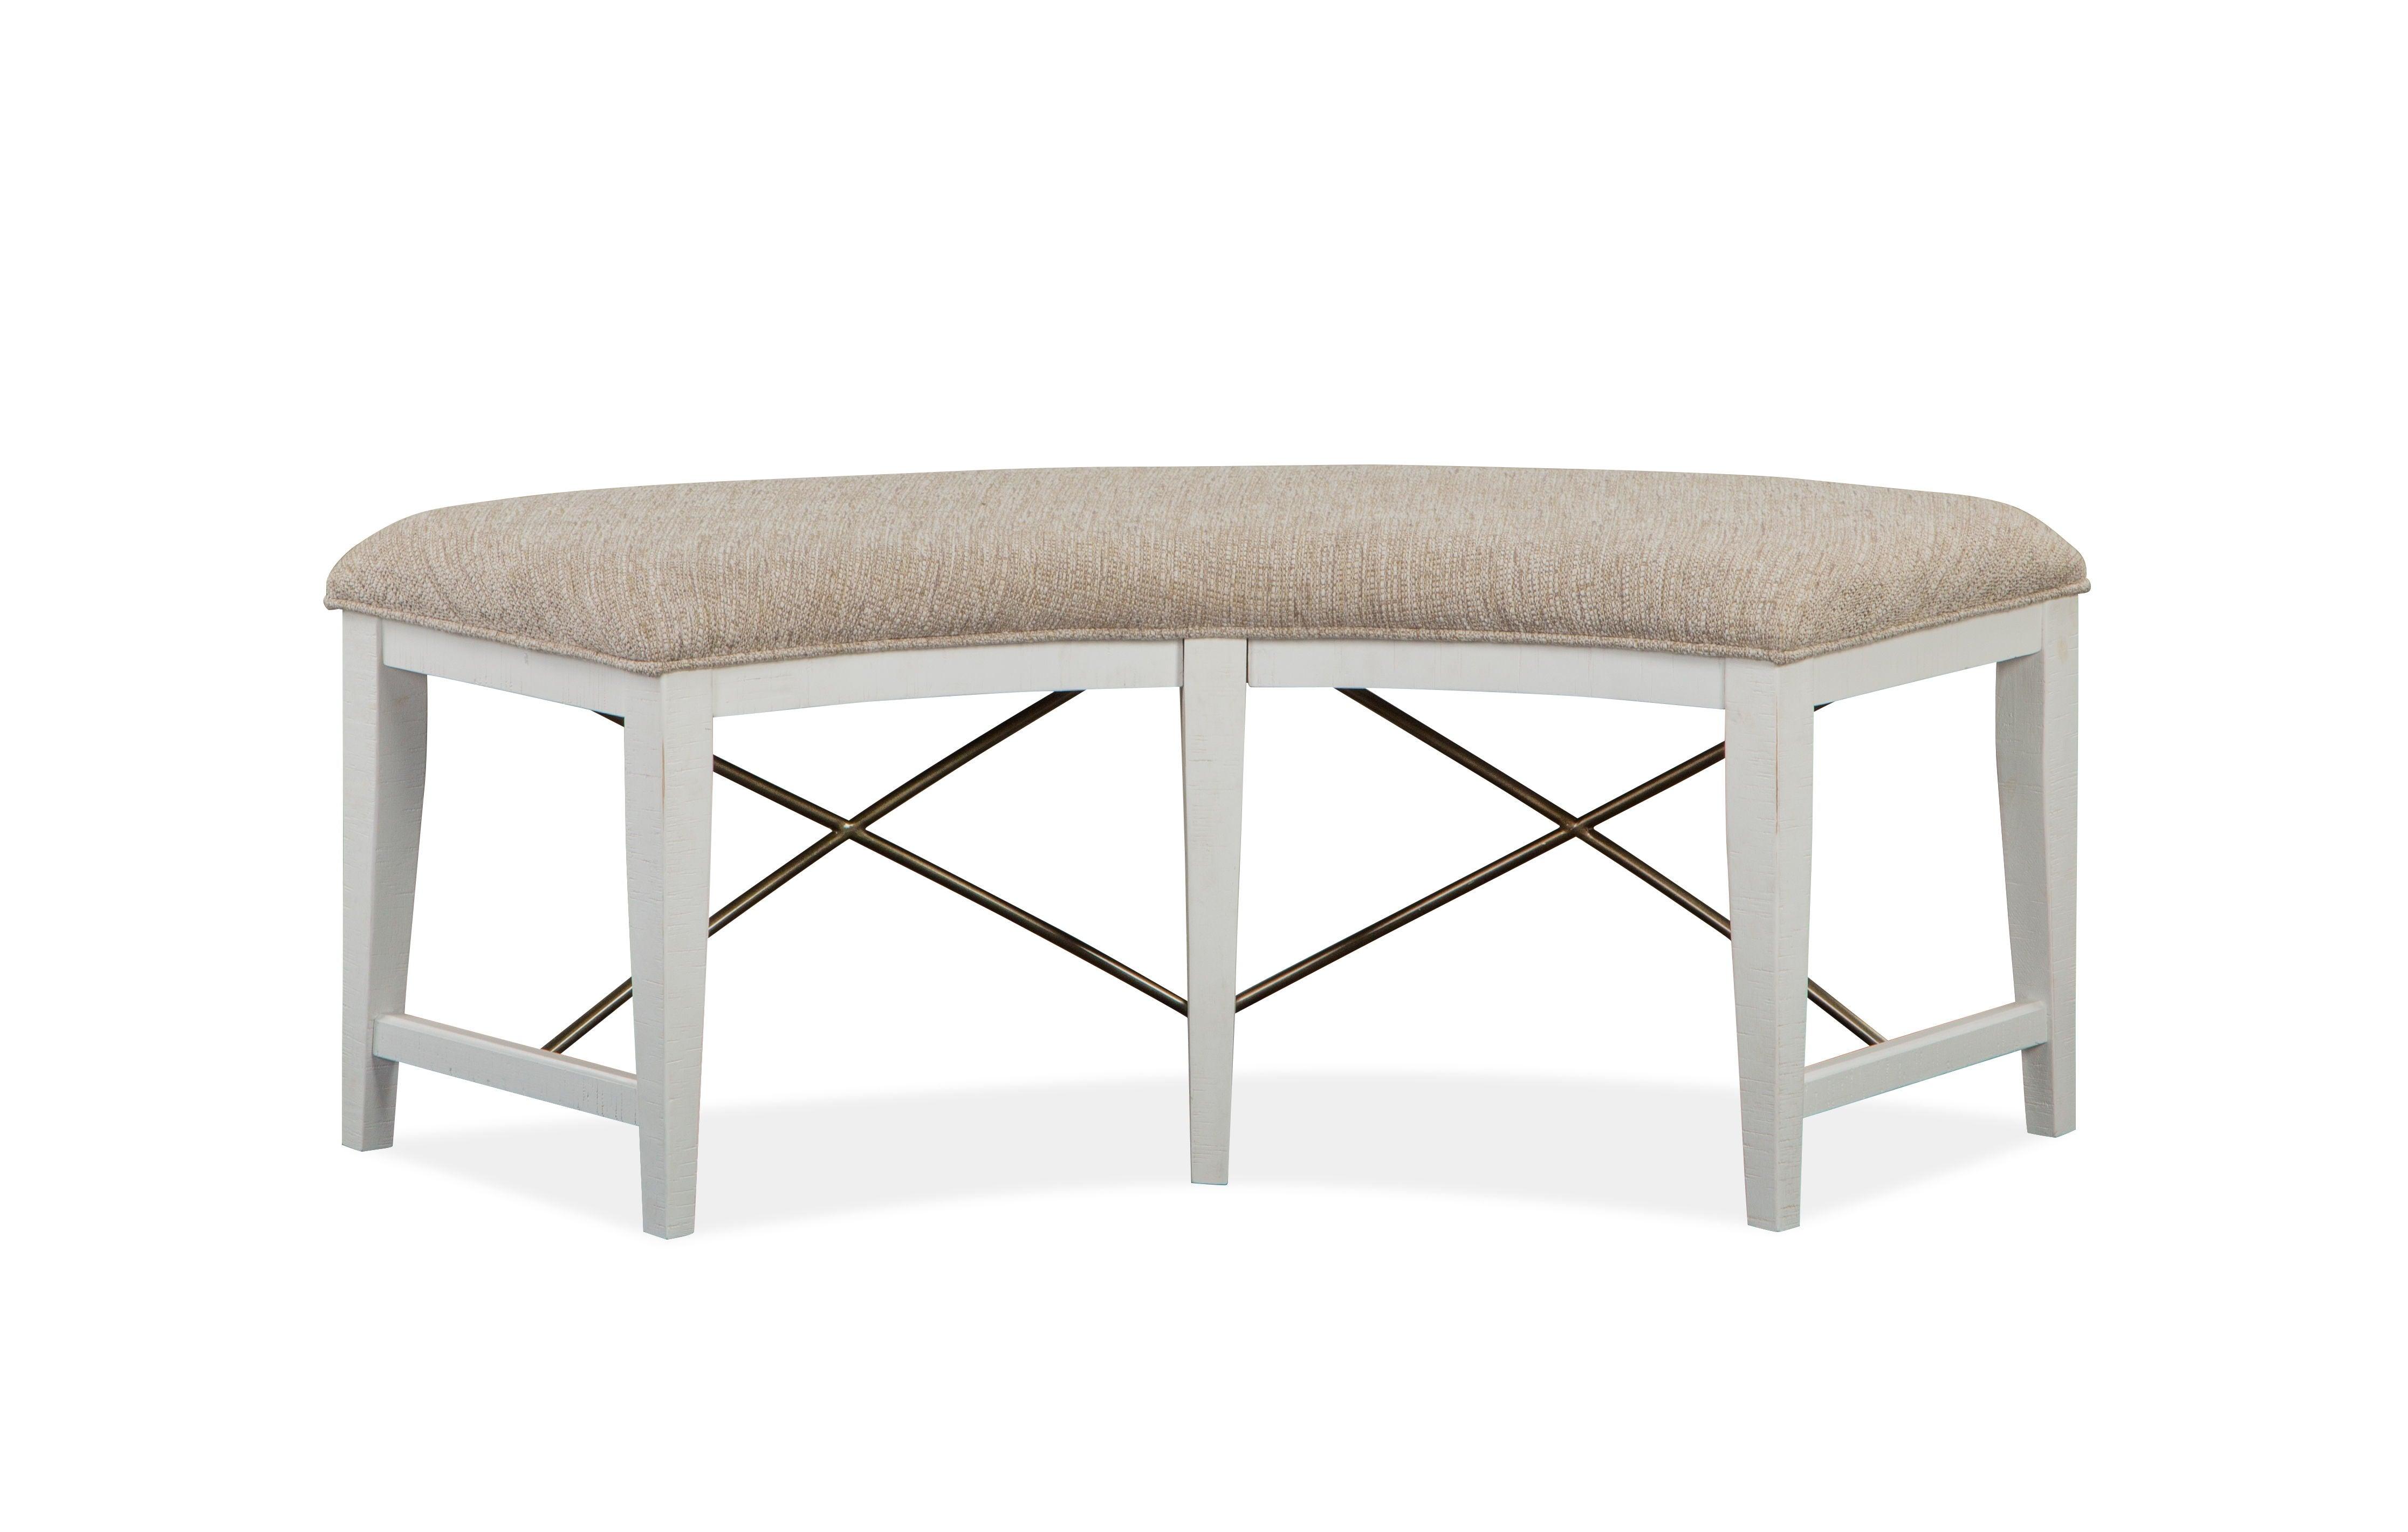 Magnussen Furniture - Heron Cove - Curved Bench With Upholstered Seat - Chalk White - 5th Avenue Furniture